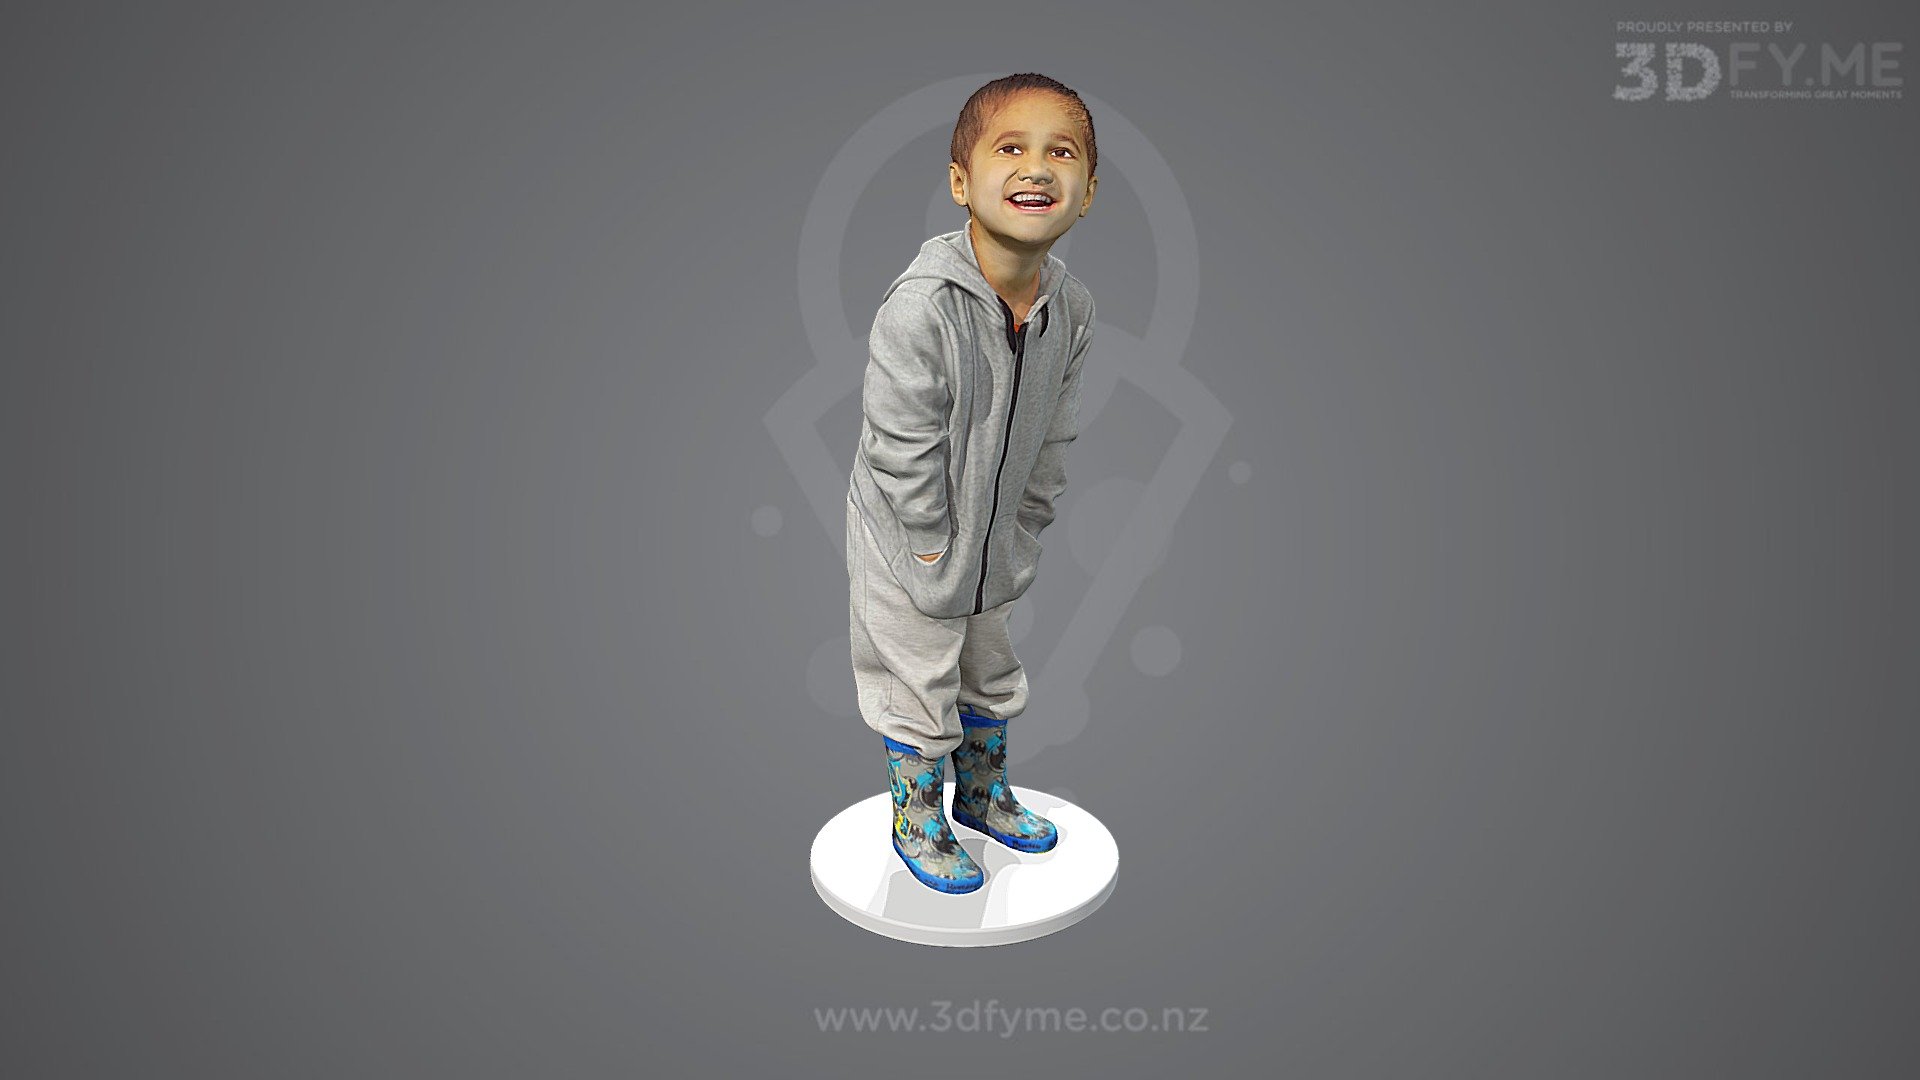 3D-Capturing kids is  fun and can be a huge challenge at the same time keeping them still - not so with this young man &hellip; a genuine pro model. Biggest challenge actually was to get him out of the booth again.. :) We got his model printed too &hellip; turned out awesome.

Get your own gorgeous 3D-Scan at https://3dfyme.co.nz 3d model